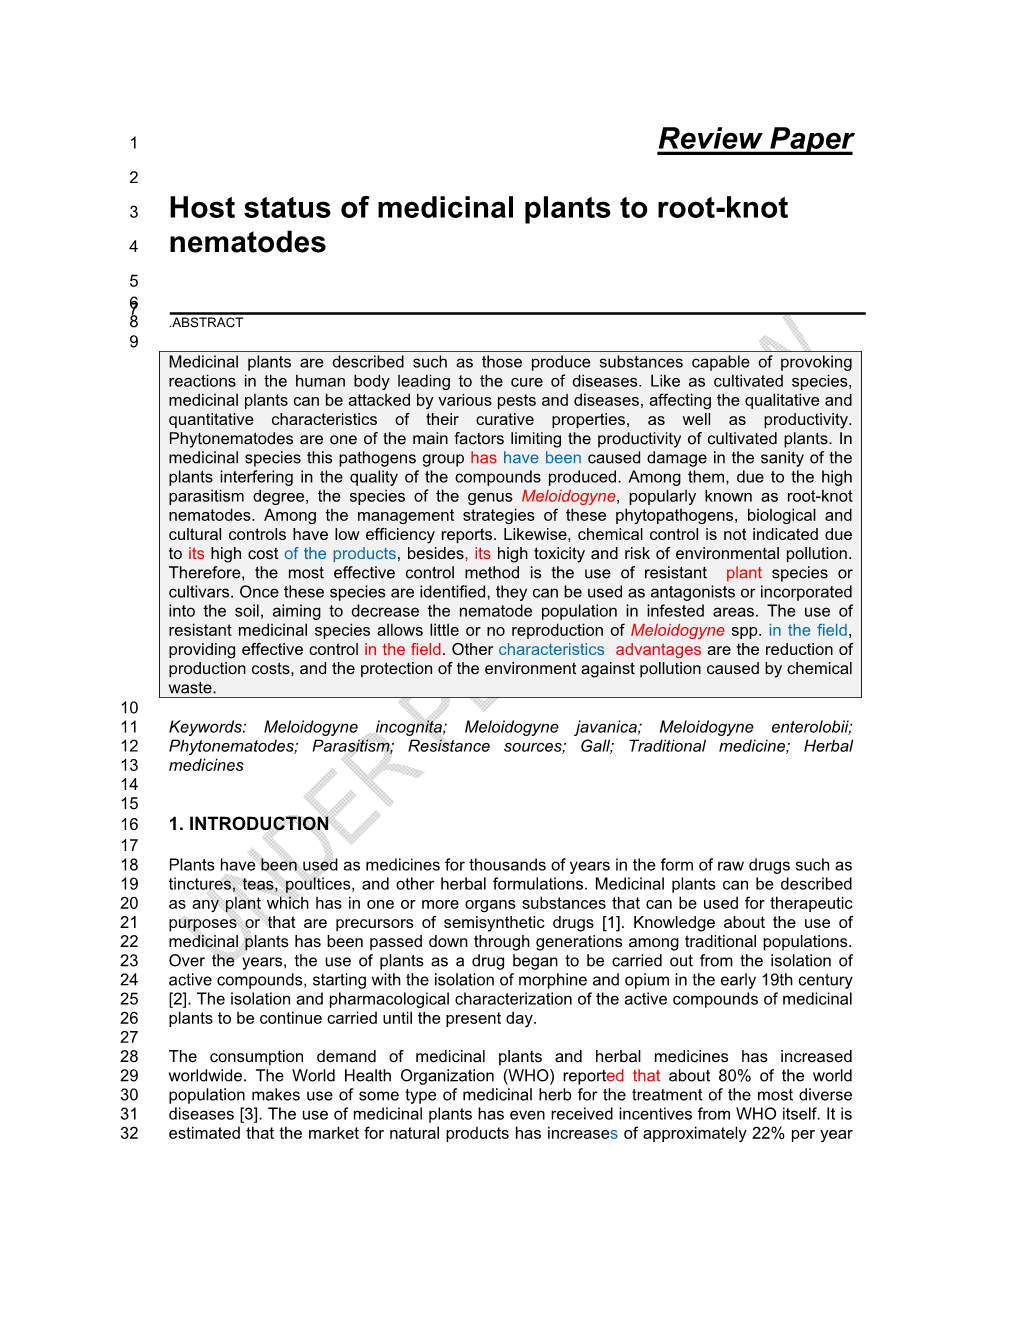 Review Paper Host Status of Medicinal Plants to Root-Knot Nematodes